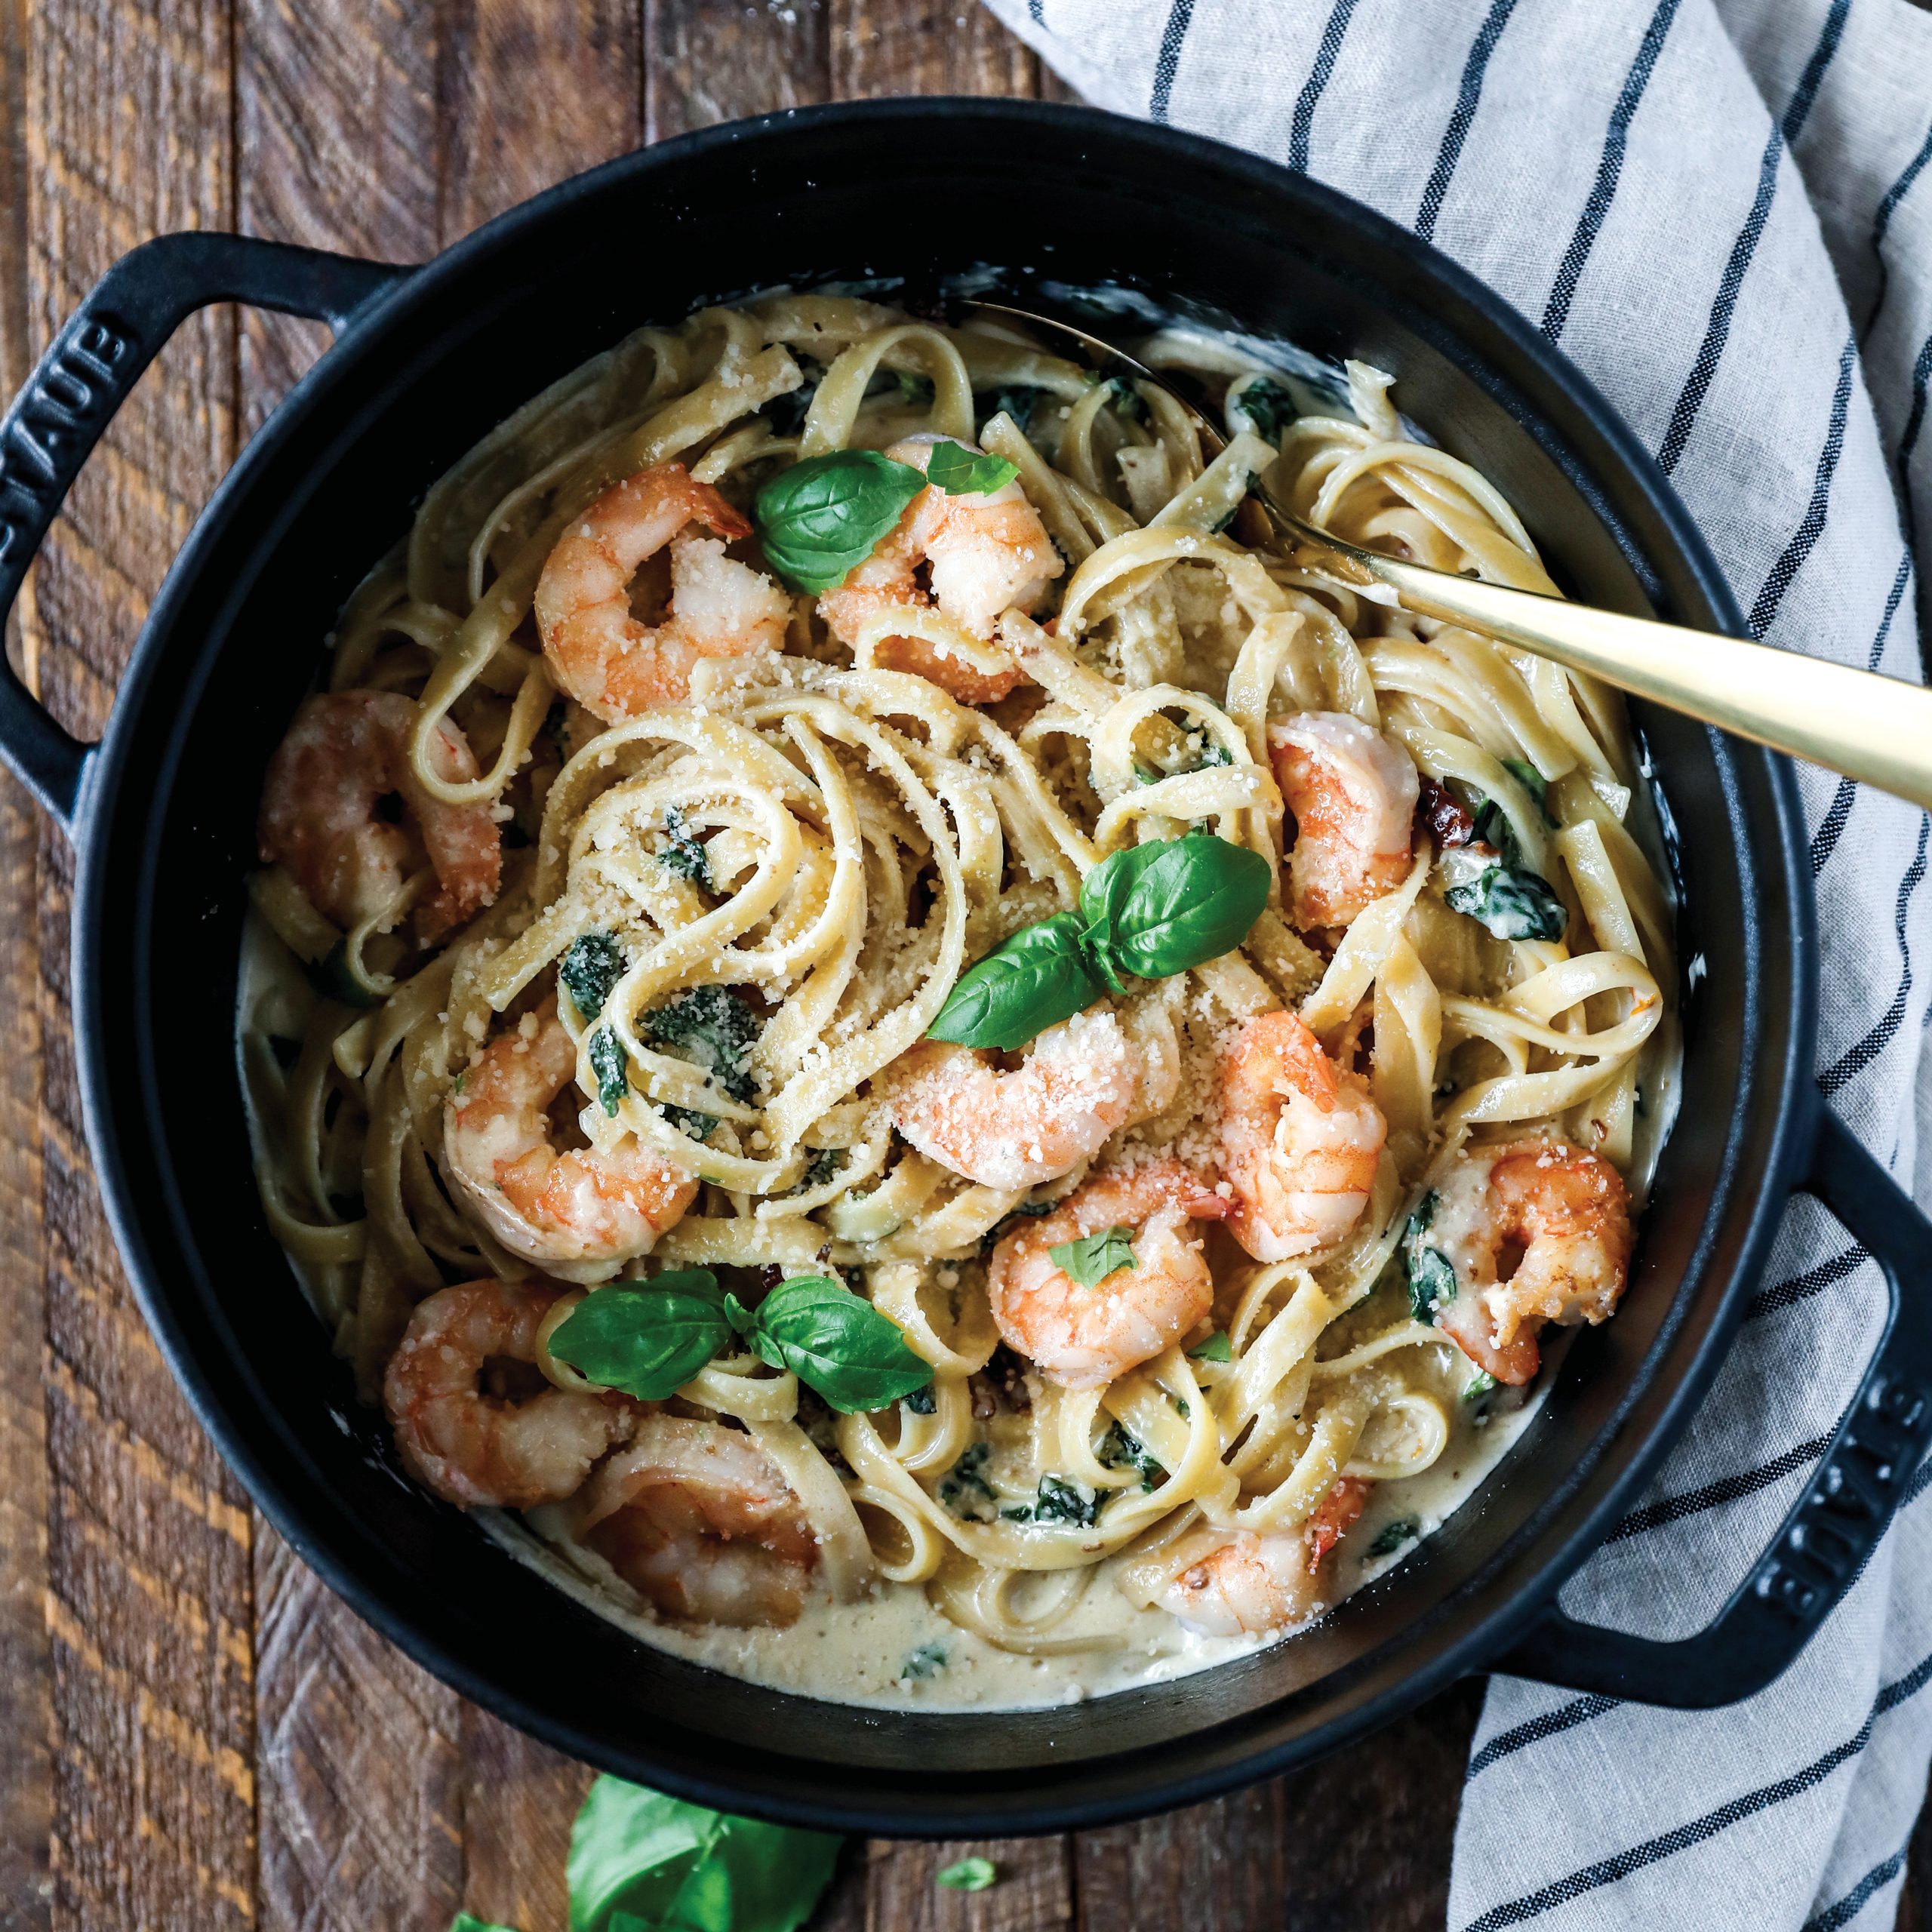 Creamy Pasta with Spinach, Sun-Dried Tomatoes and Shrimp